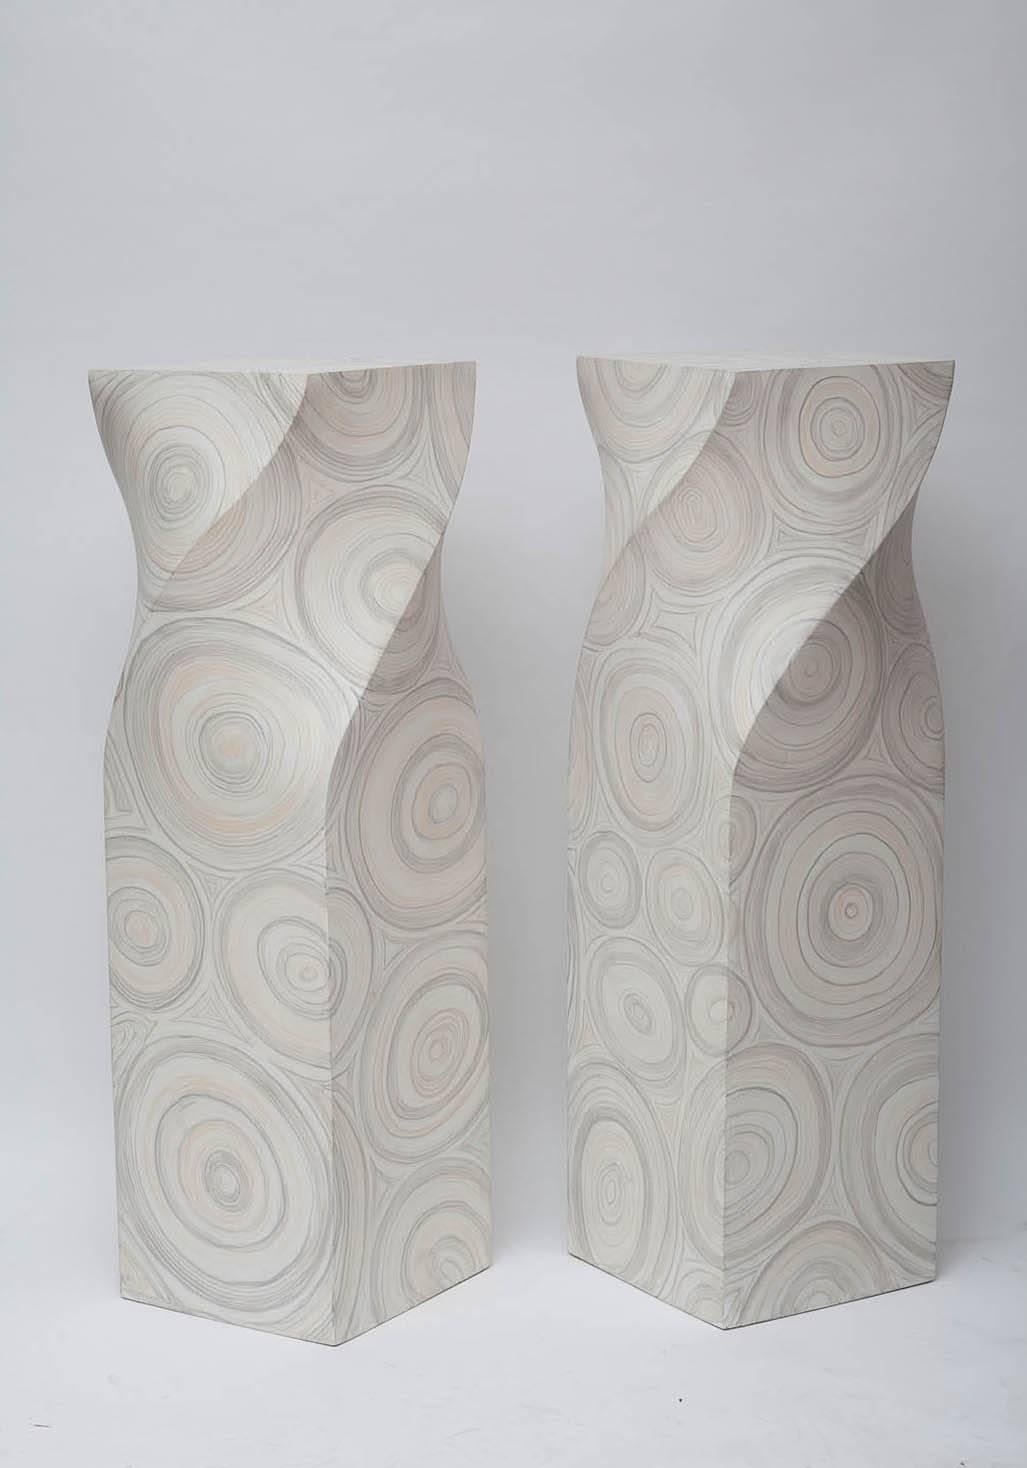 Pair of fiberglass, helix-twisted pedestals, faux painted in a stylized grey and gold agate pattern, circa 1970. Top measures W14in. x D14in.